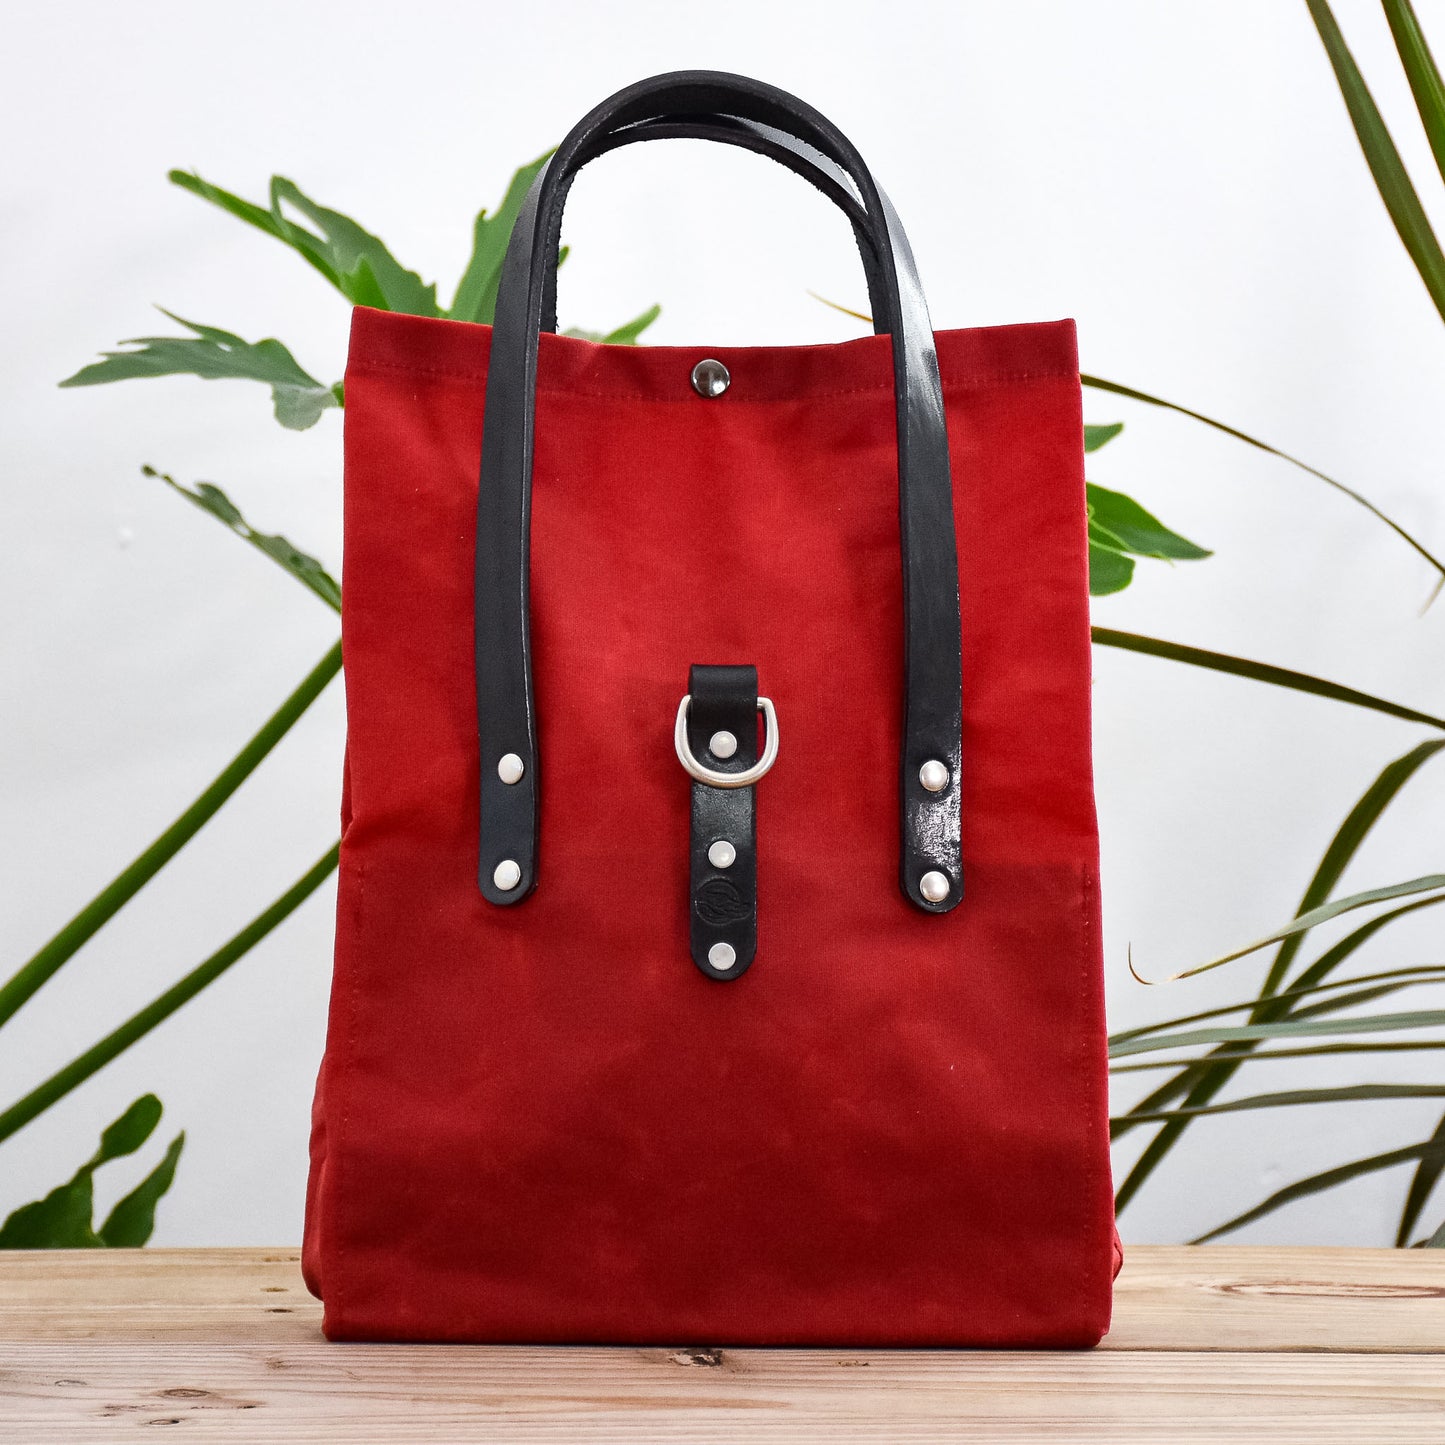 Rich Red Bag No. 2 - On the Go Bag